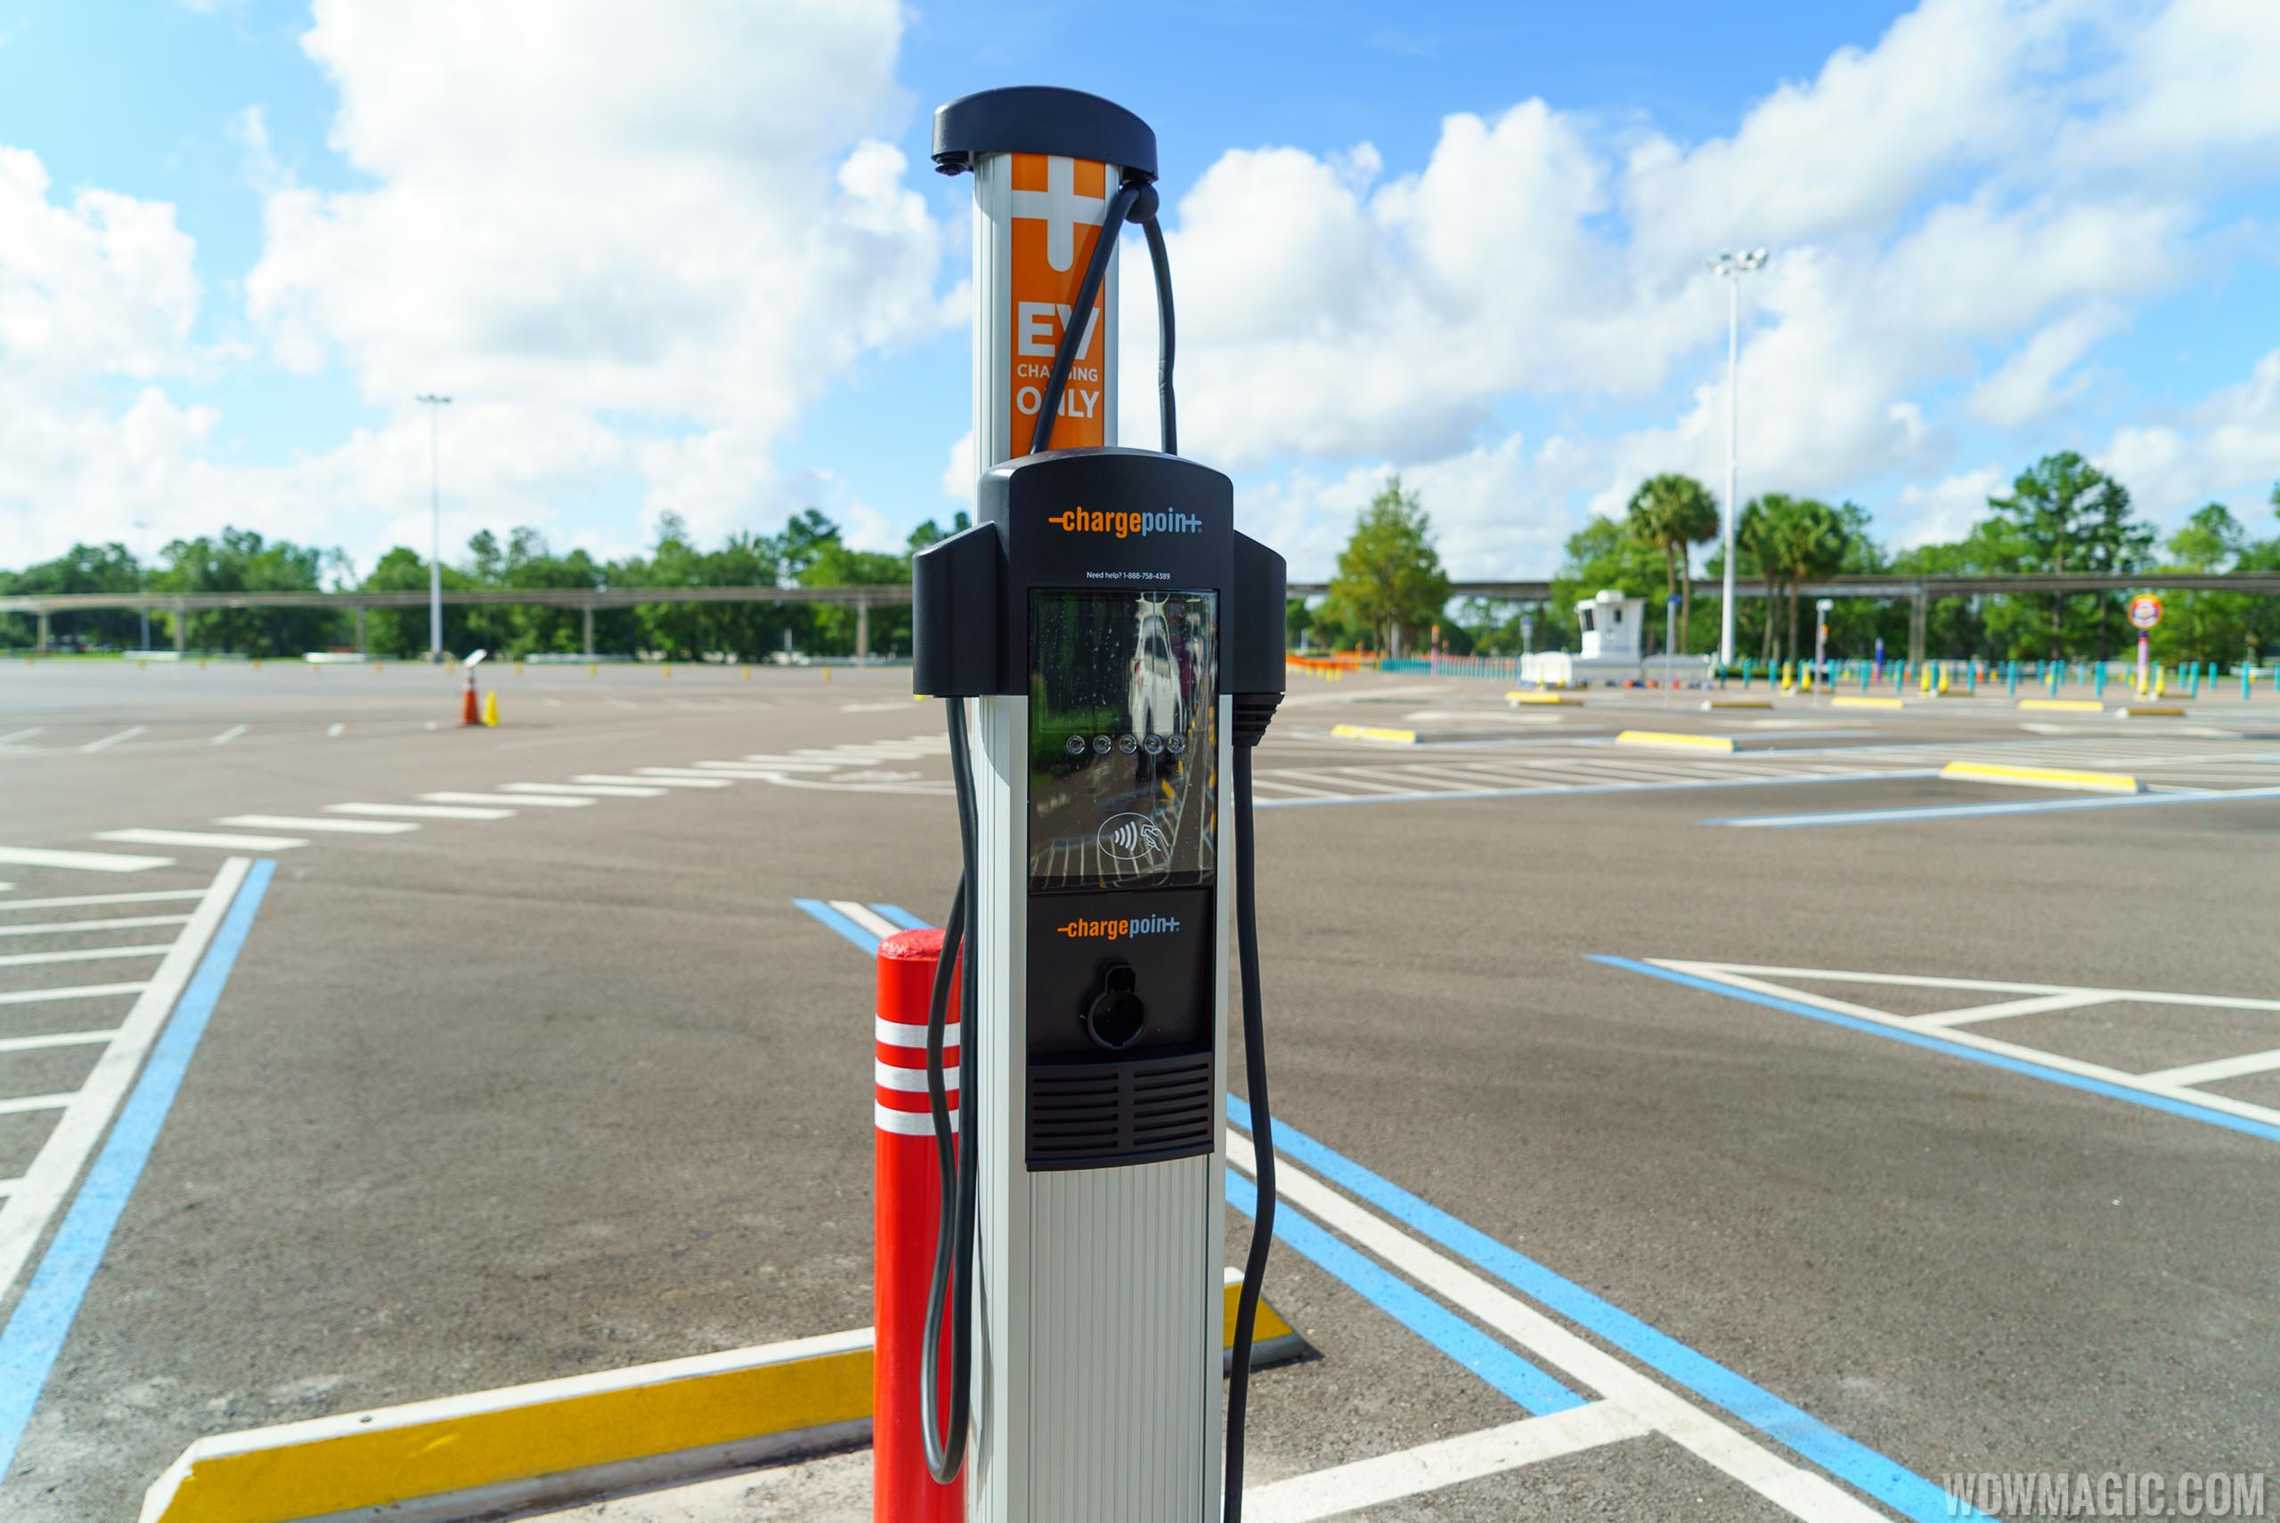 PHOTOS Electric vehicle charging stations coming to the Magic Kingdom